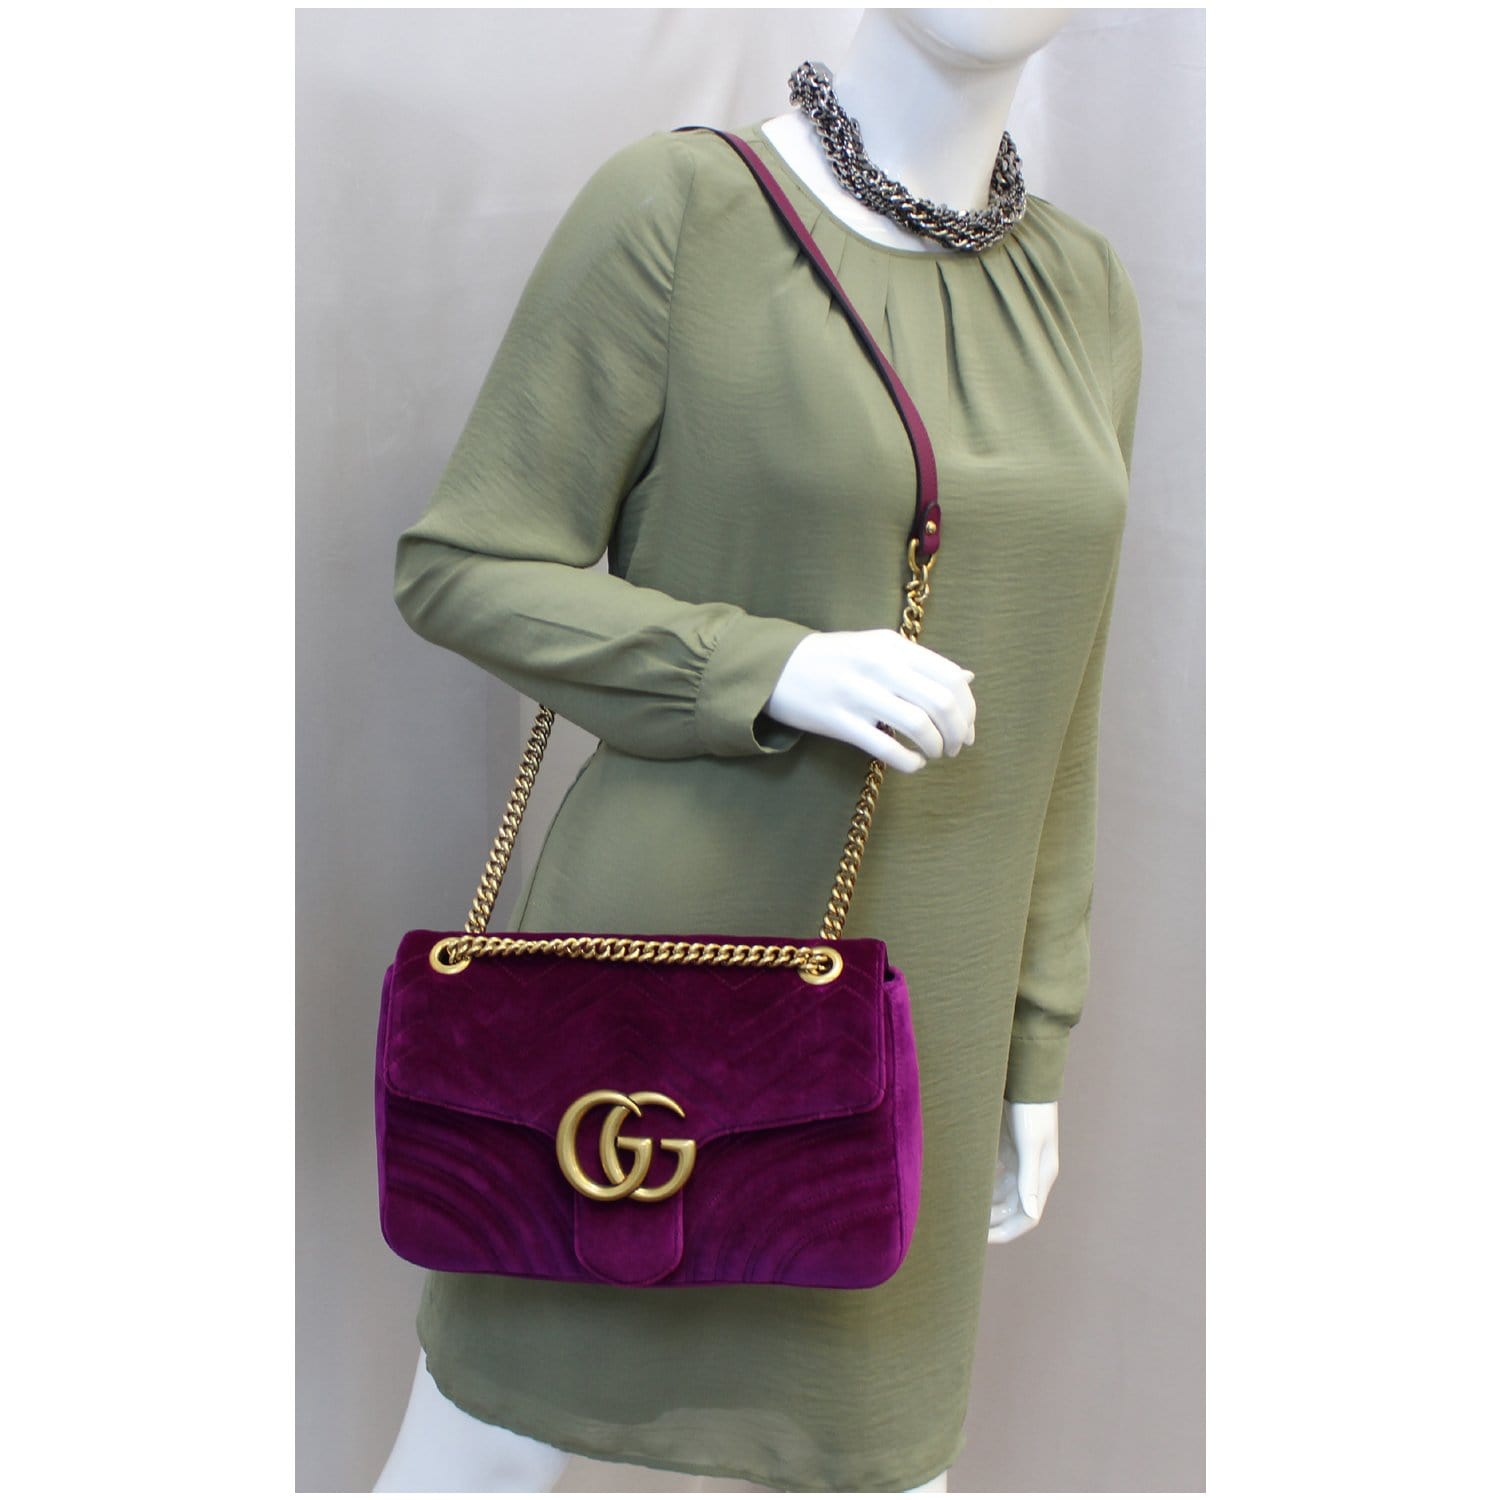 Gucci Purple Quilted Velvet Embroidered Loved Medium Marmont Bag